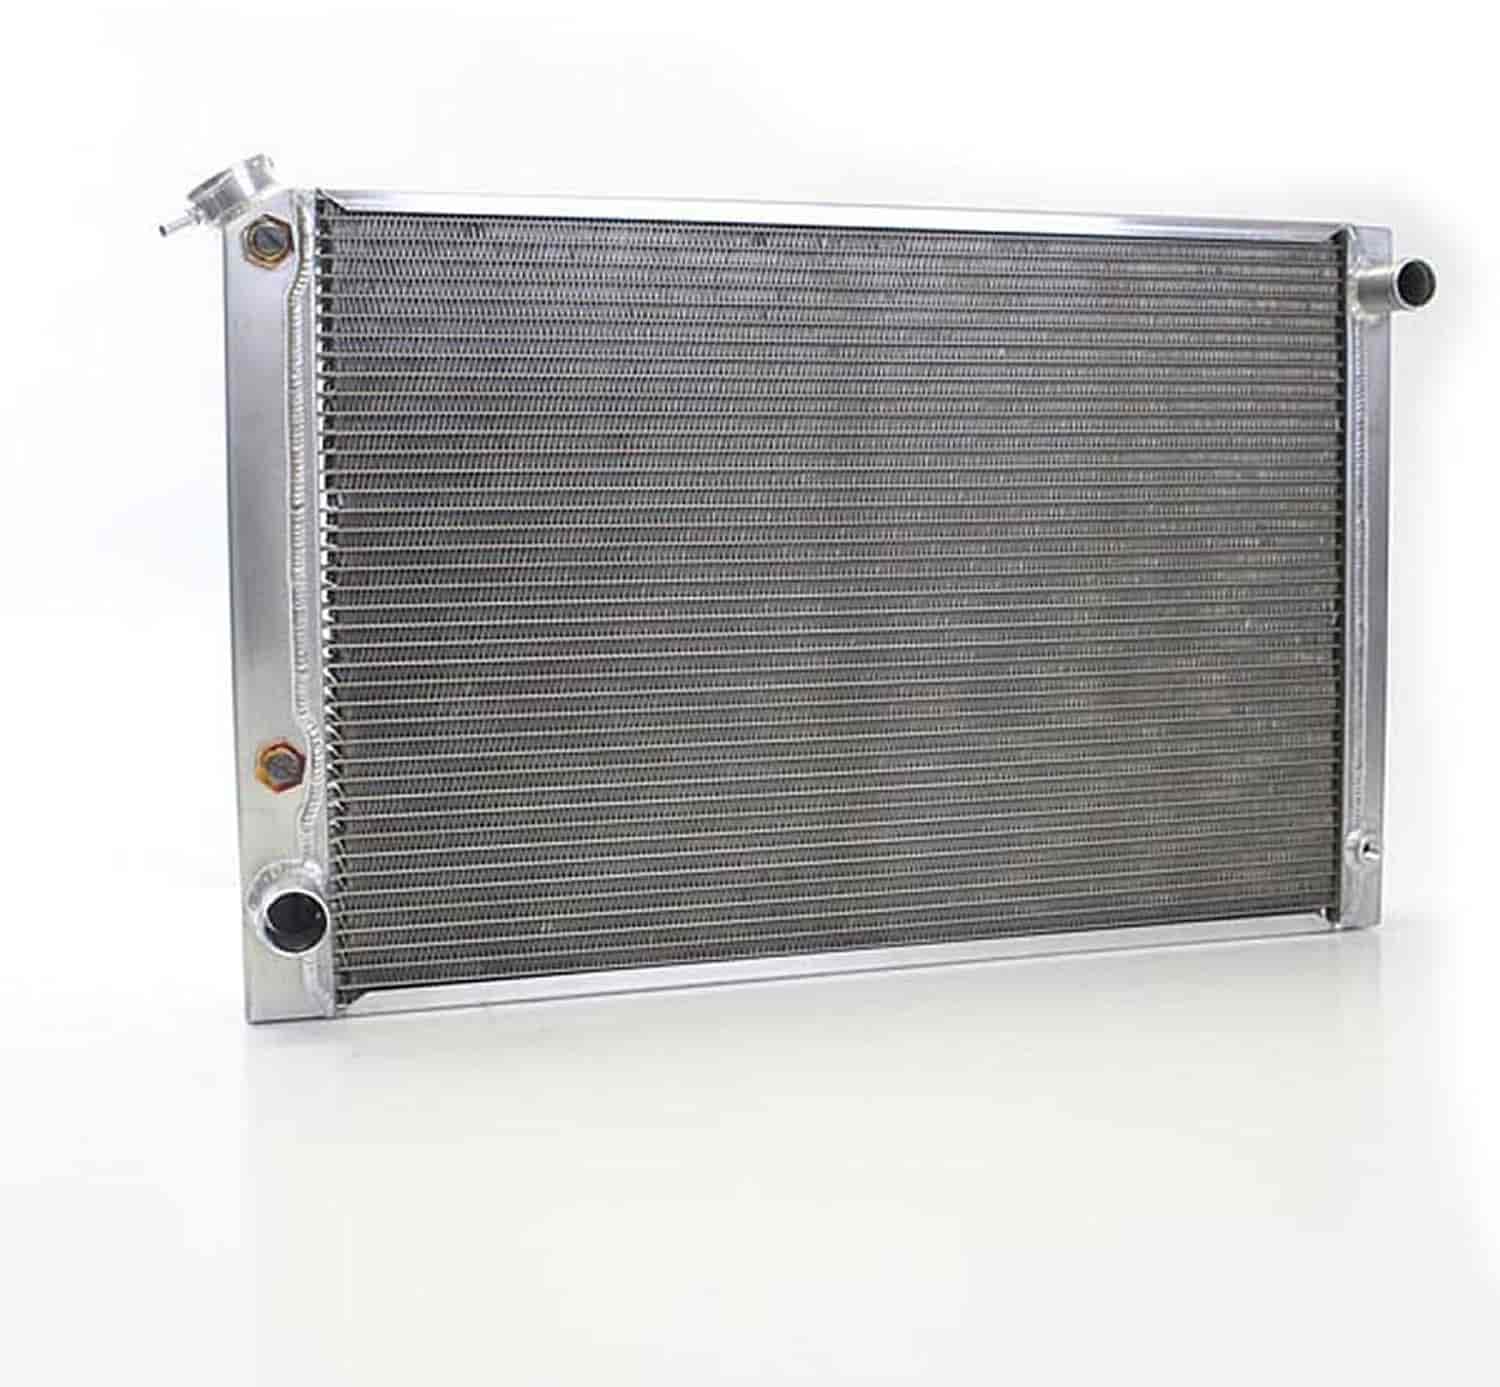 PerformanceFit Radiator 1979-1993 Ford Fox Body Mustang with Transmission Cooler